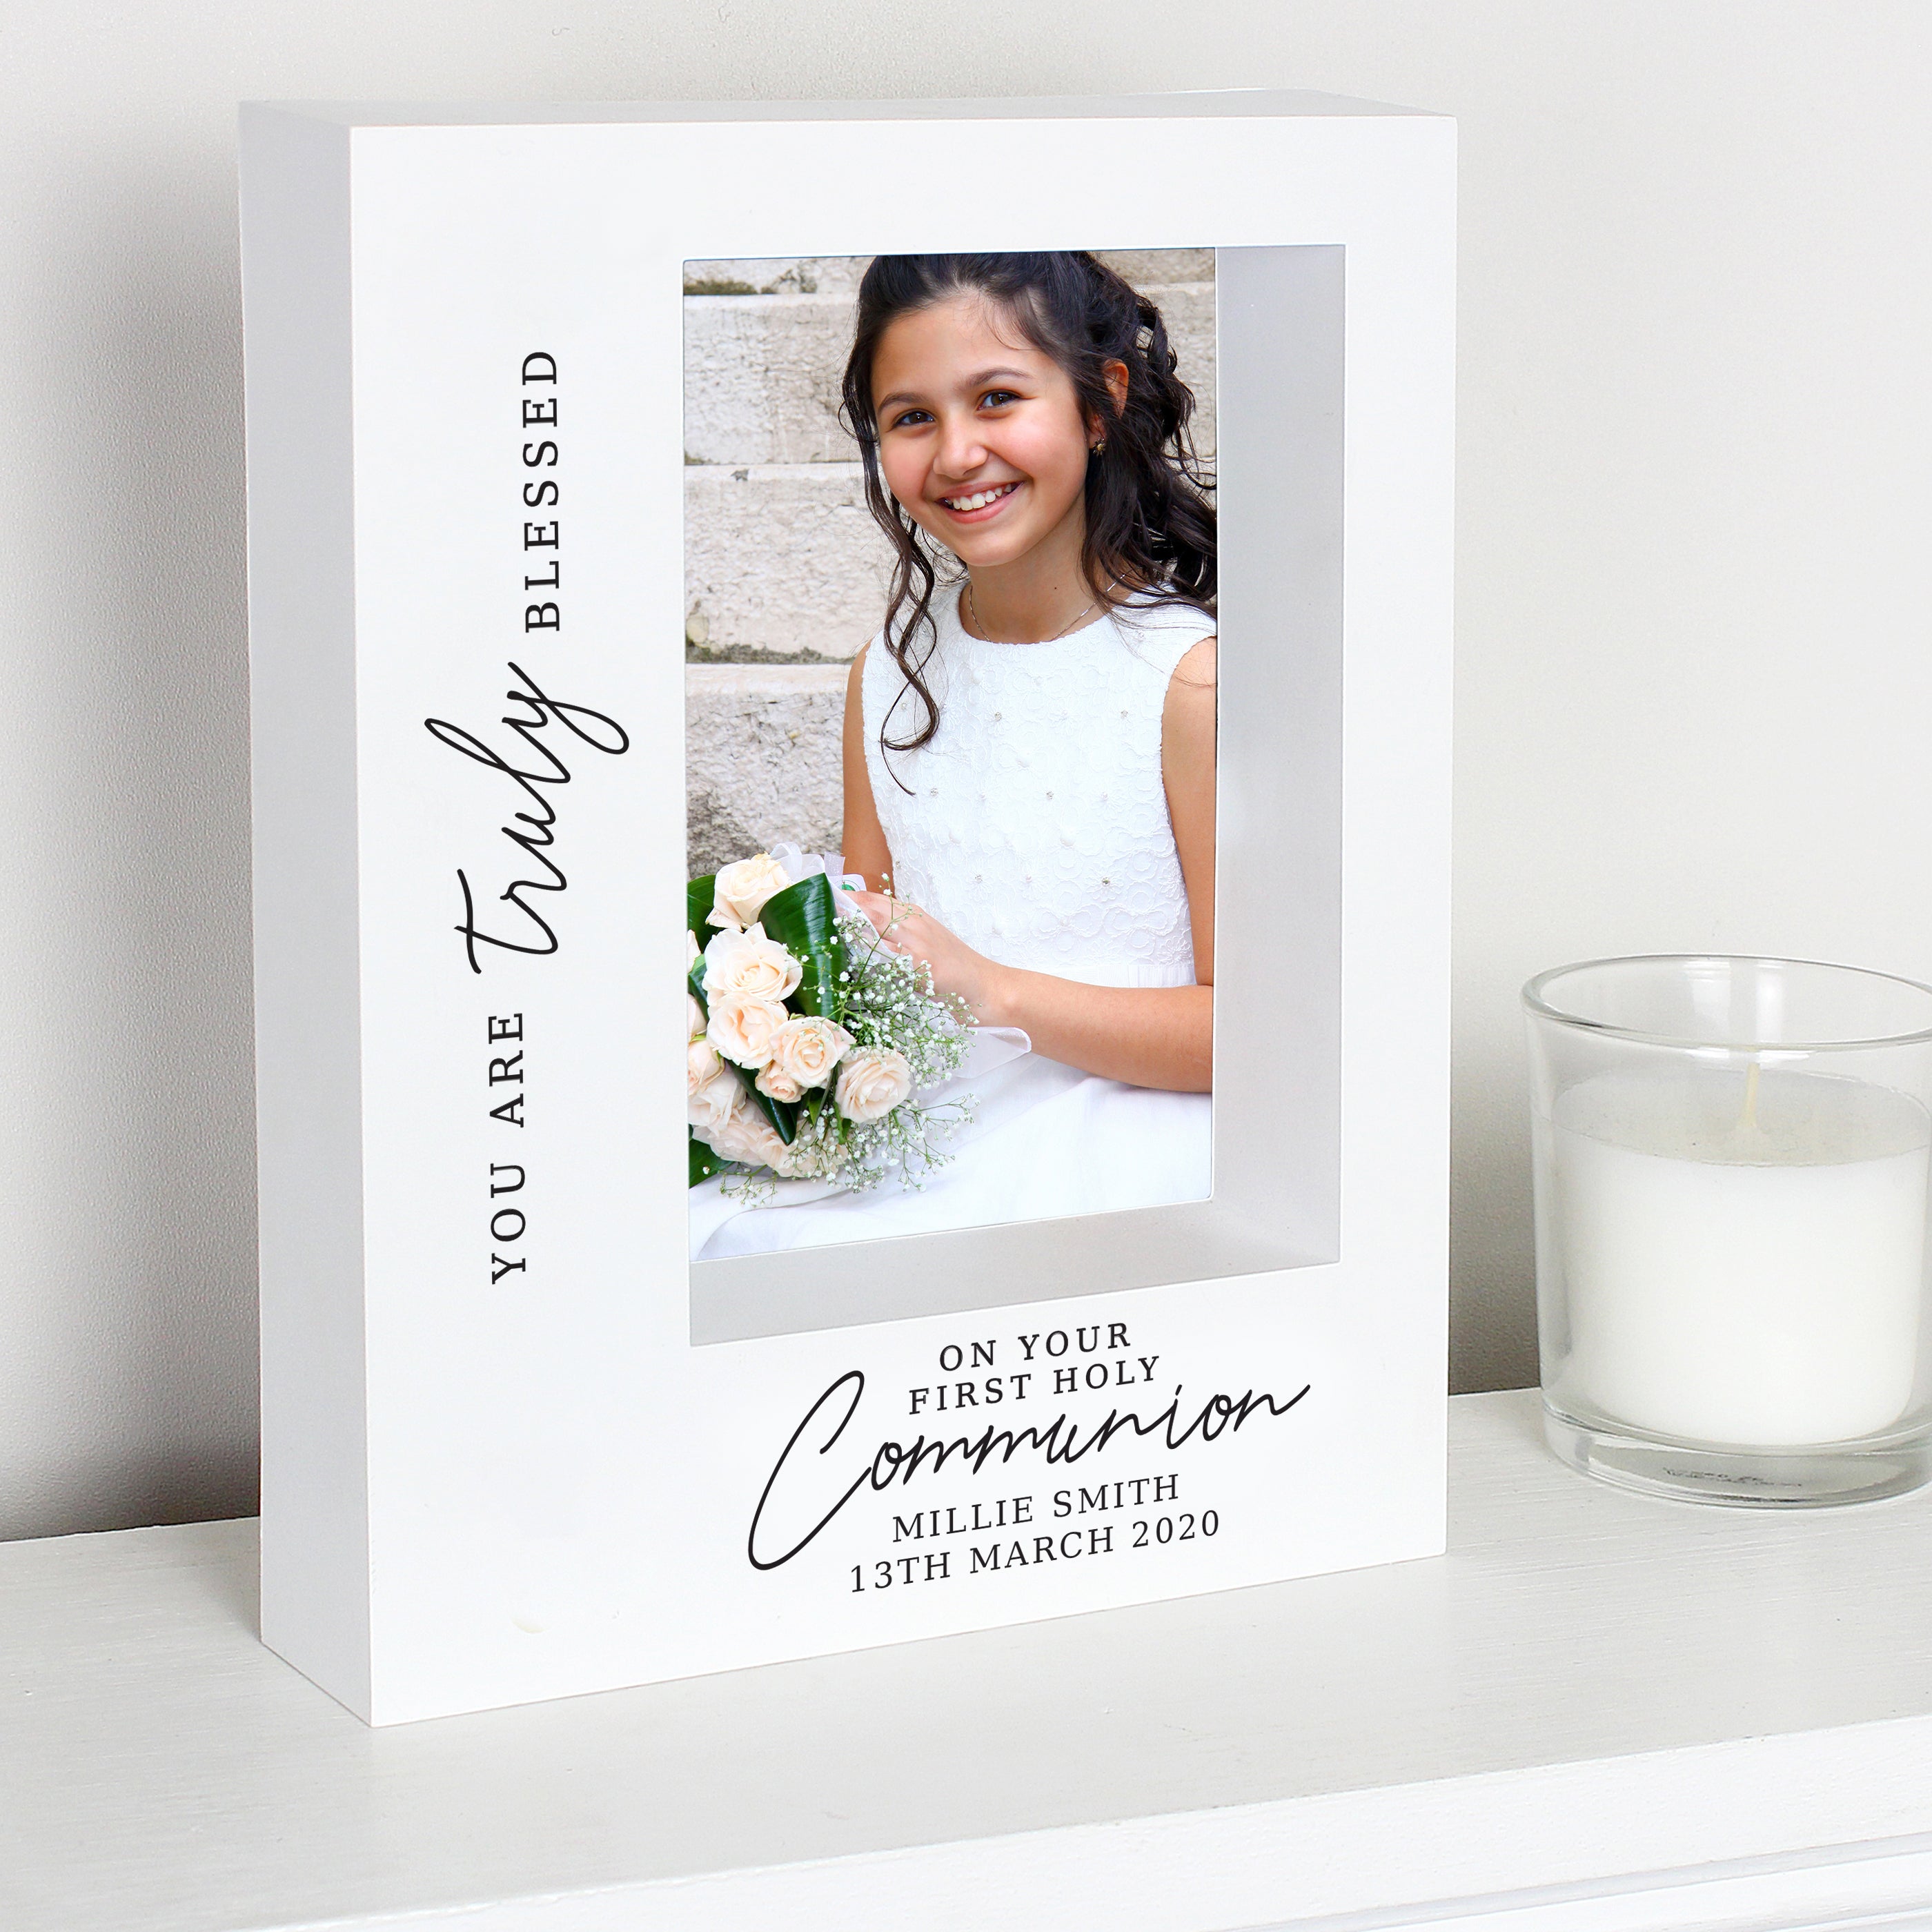 Personalised 'Truly Blessed' First Holy Communion 5x7 Box Photo Frame